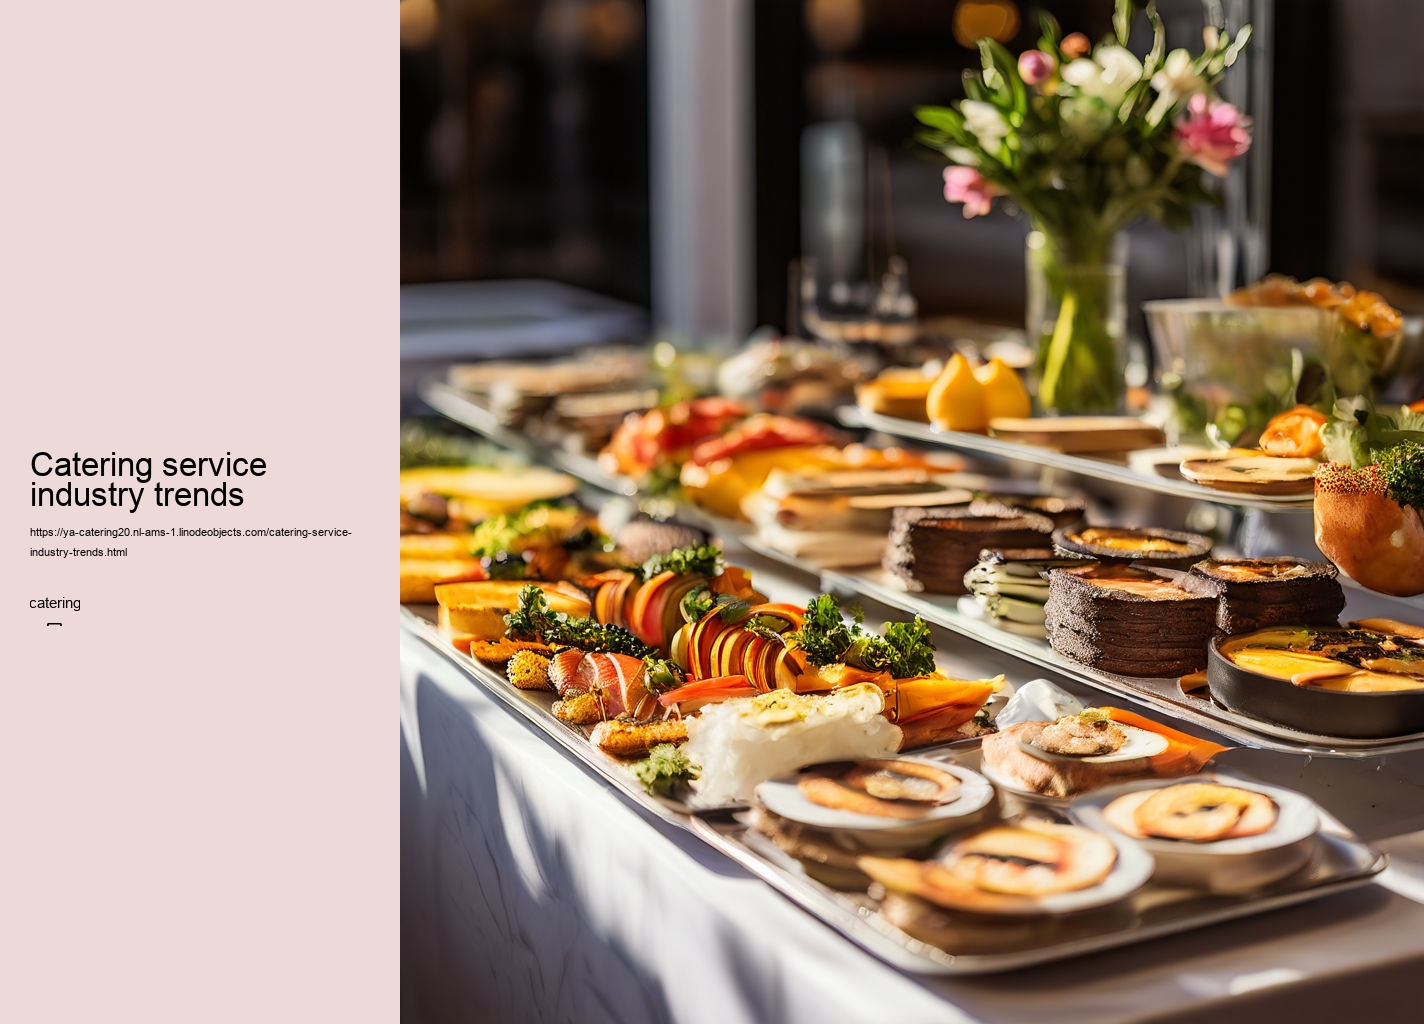 Catering service industry trends